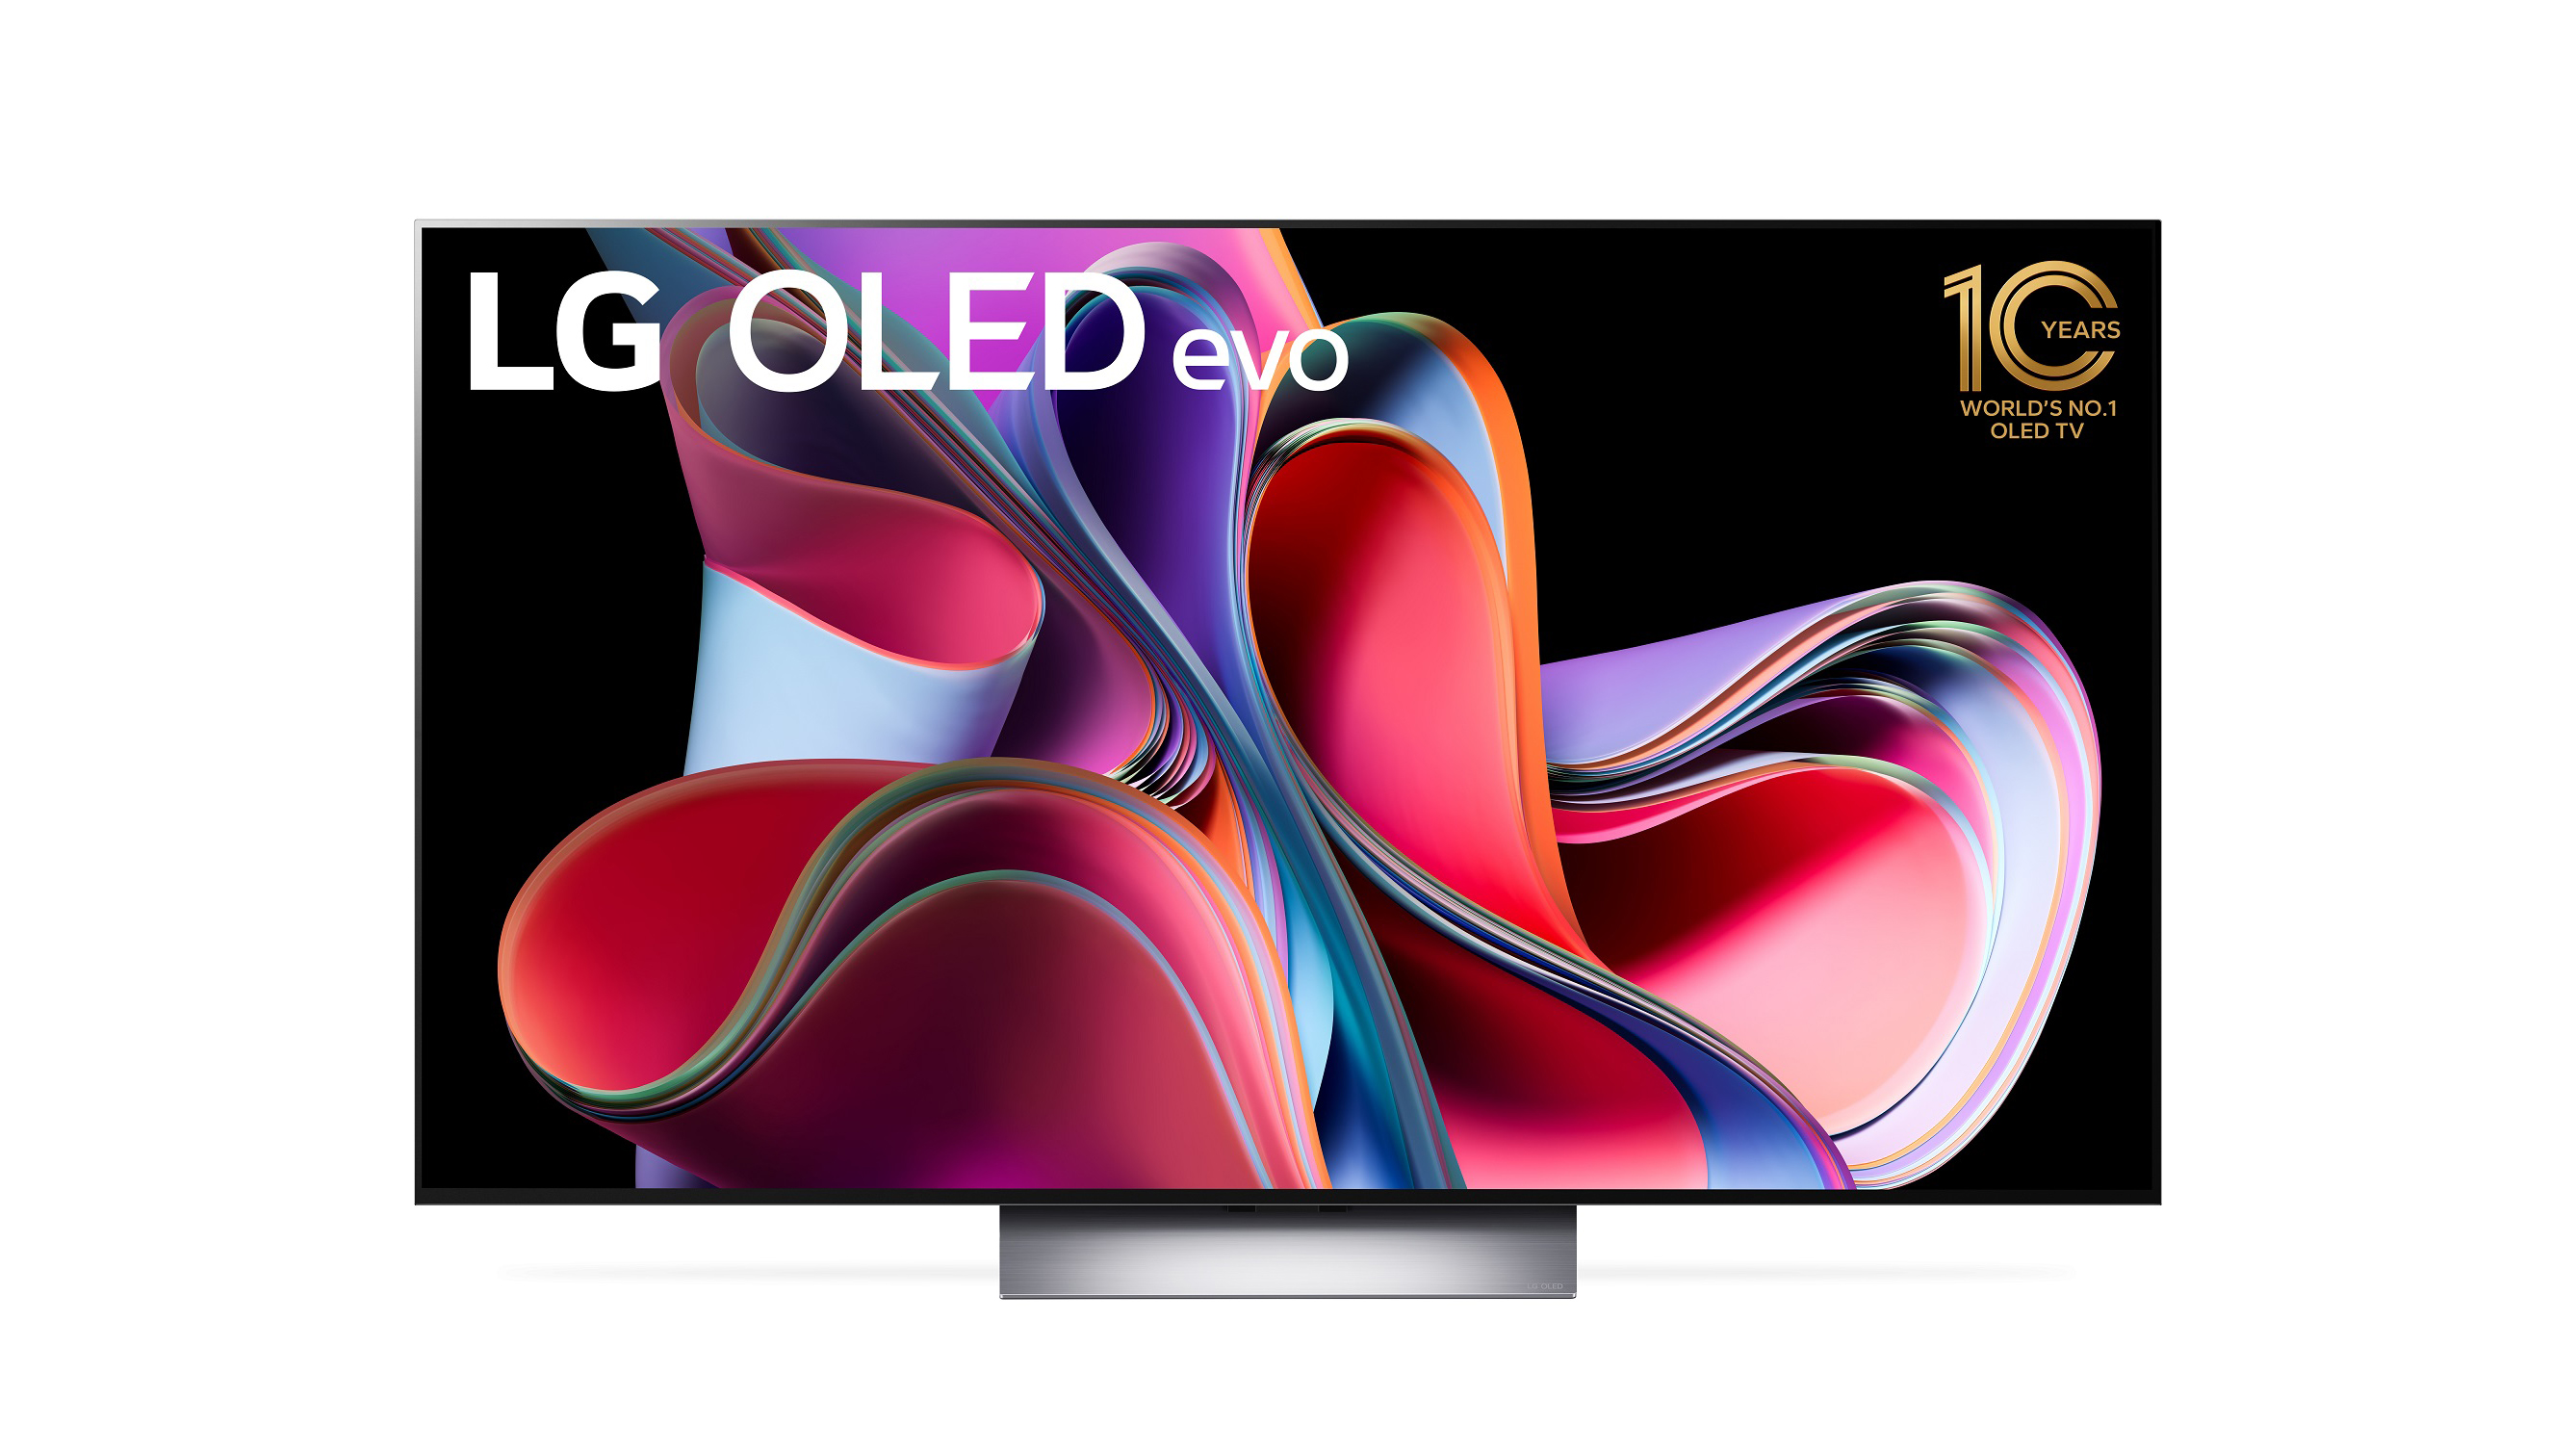 The LG G3 OLED TV displaying an abstract colorful pattern.